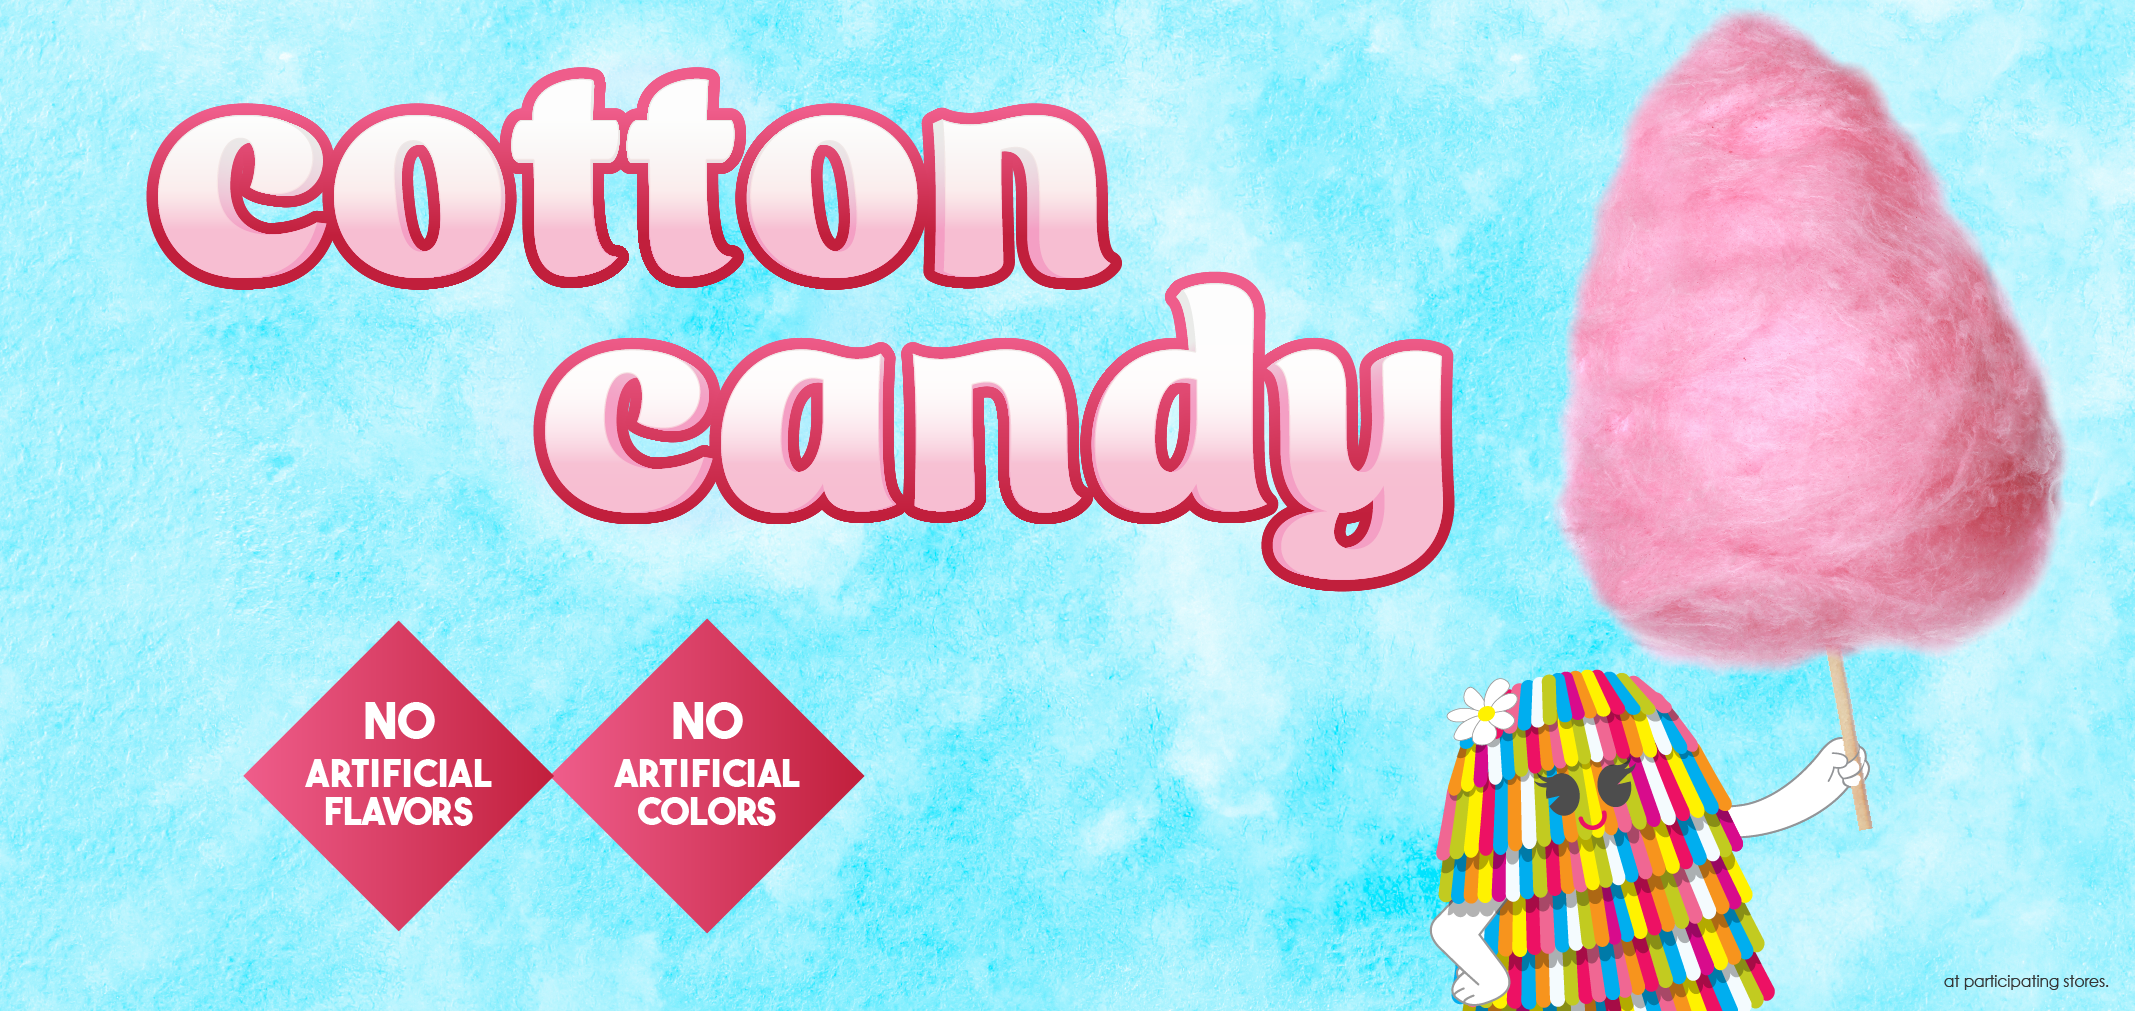 Cotton Candy label image